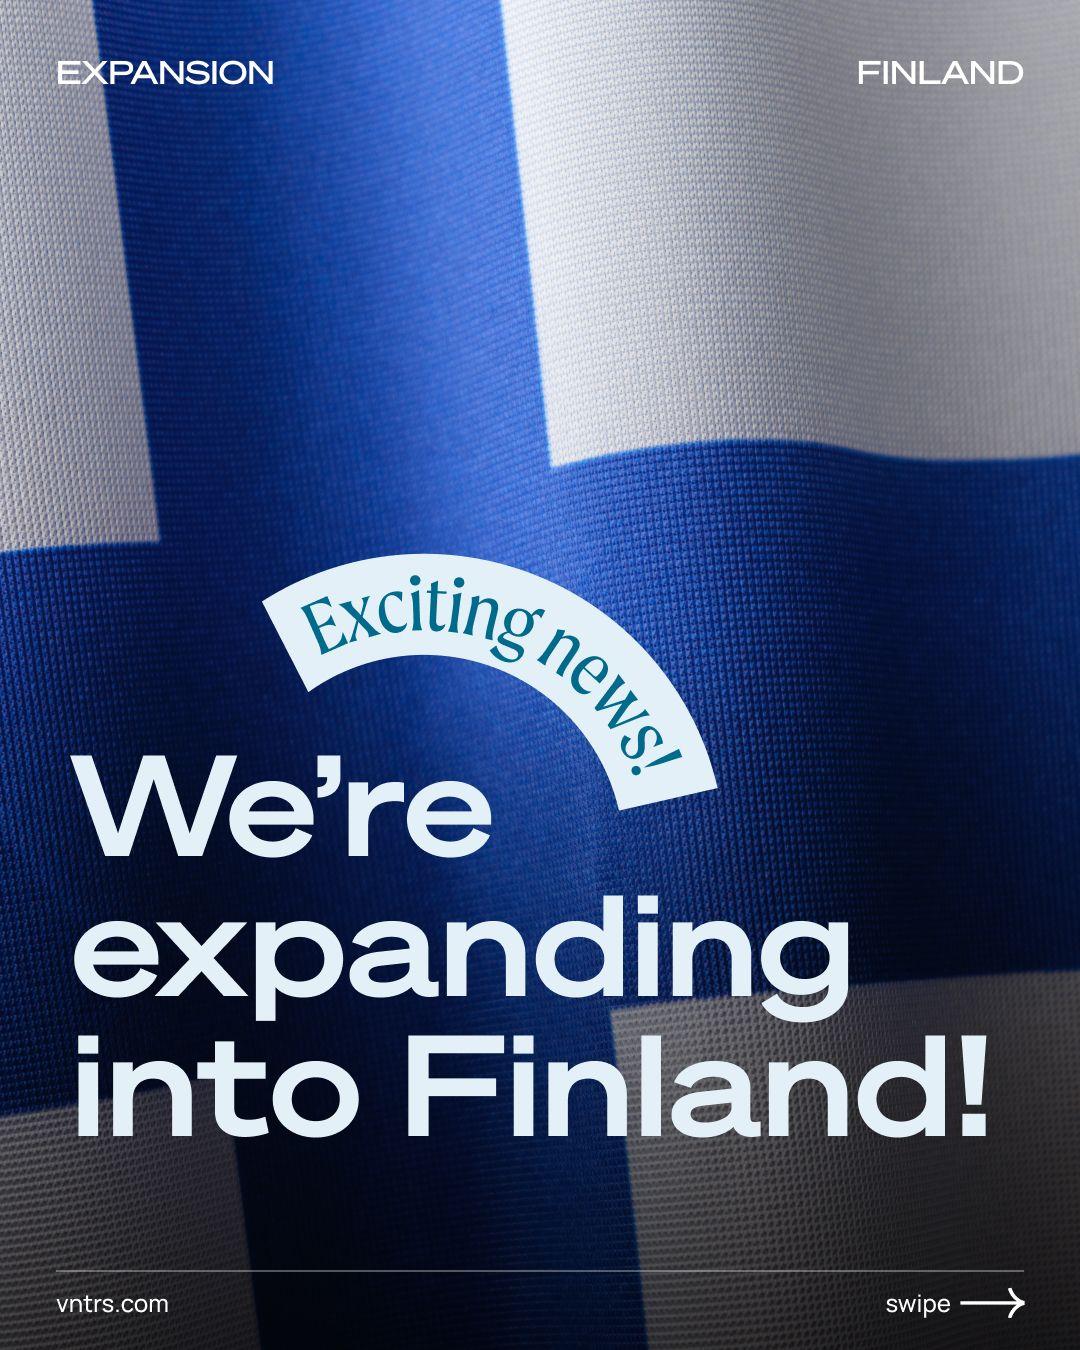 VNTRS expands to Finland